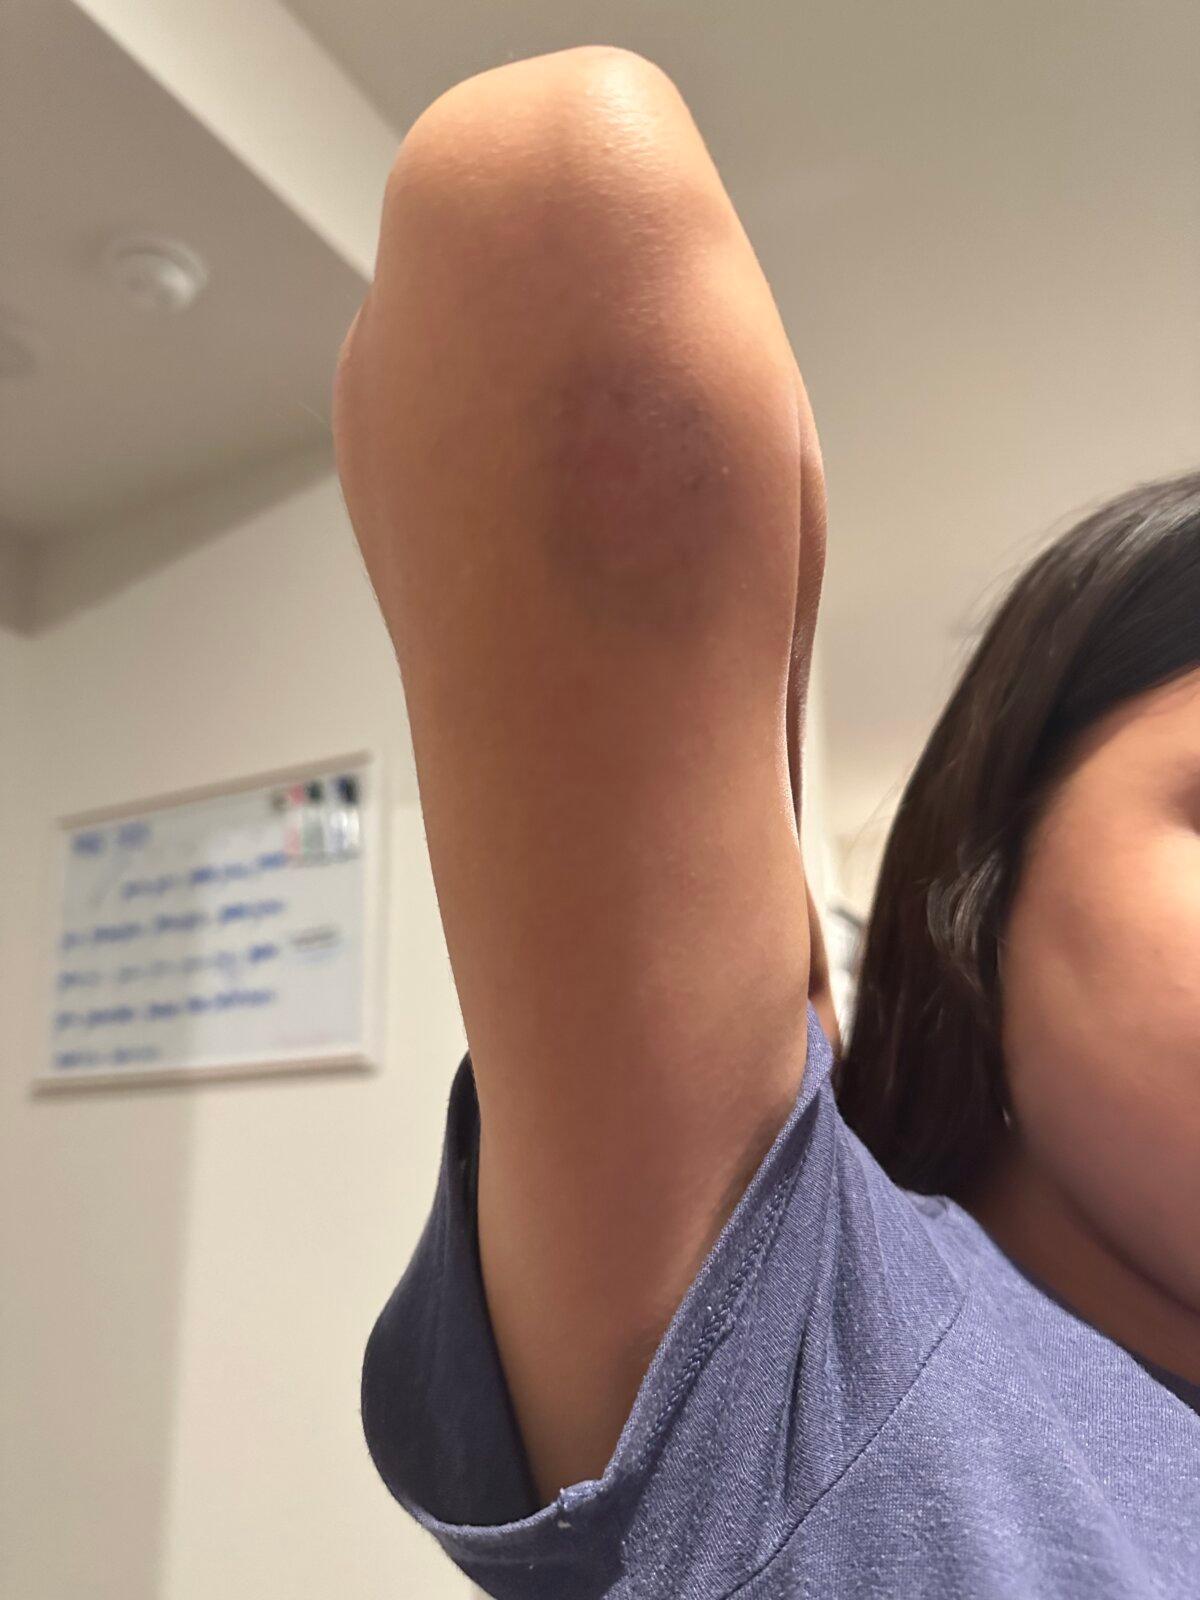 Ashley Duarte said her teen was attacked by four students on a bus in Denton, Texas, on May 16, 2023.